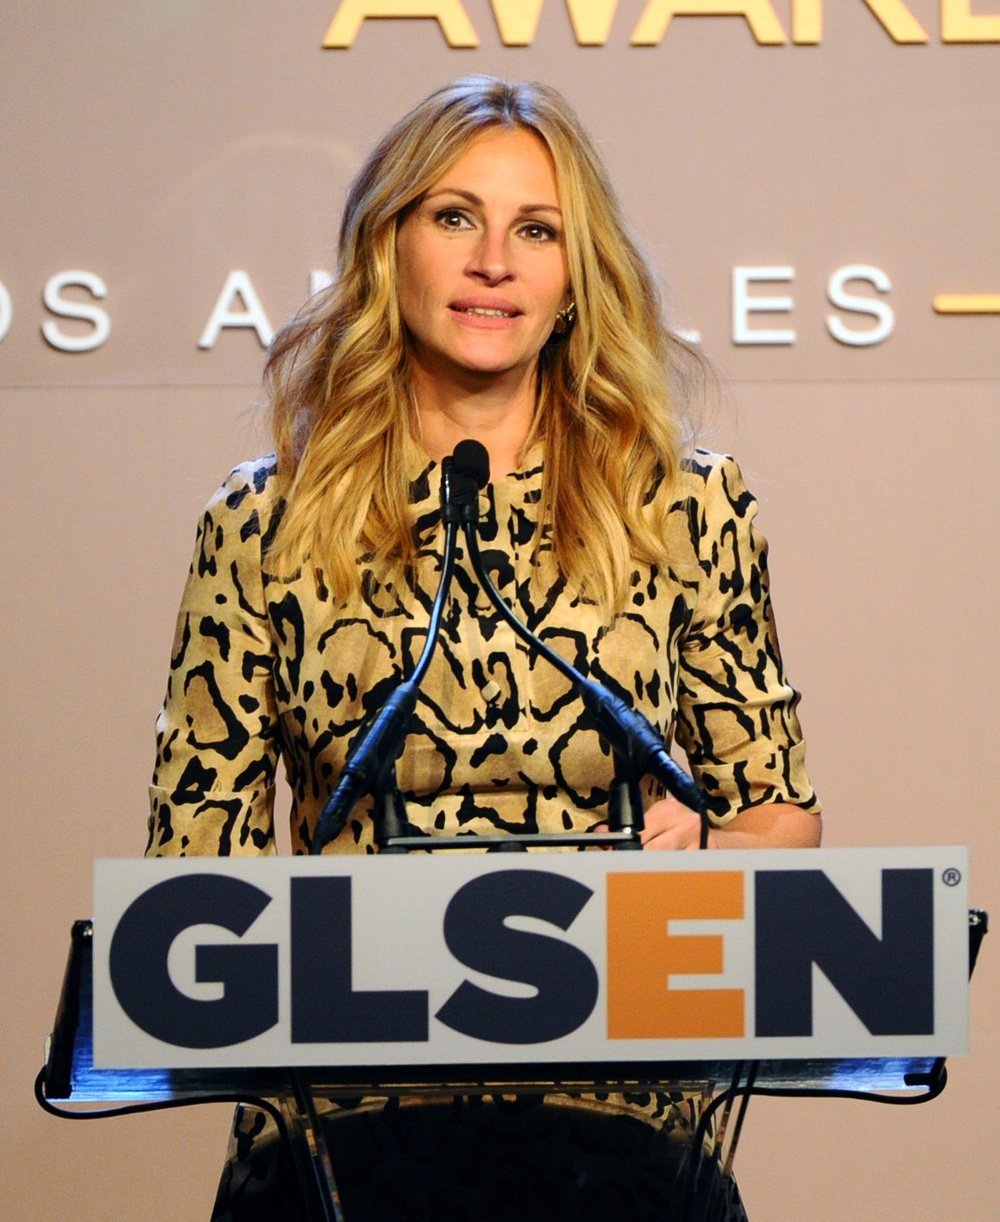 BEVERLY HILLS, CA - OCTOBER 17:  Honoree Julia Roberts accepts the GLSEN Respect Humanitarian Award onstage the 10th annual GLSEN Respect Awards at the Regent Beverly Wilshire Hotel on October 17, 2014 in Beverly Hills, California.  (Photo by Jonathan Leibson/Getty Images for GLSEN Respect Awards-Los Angeles)